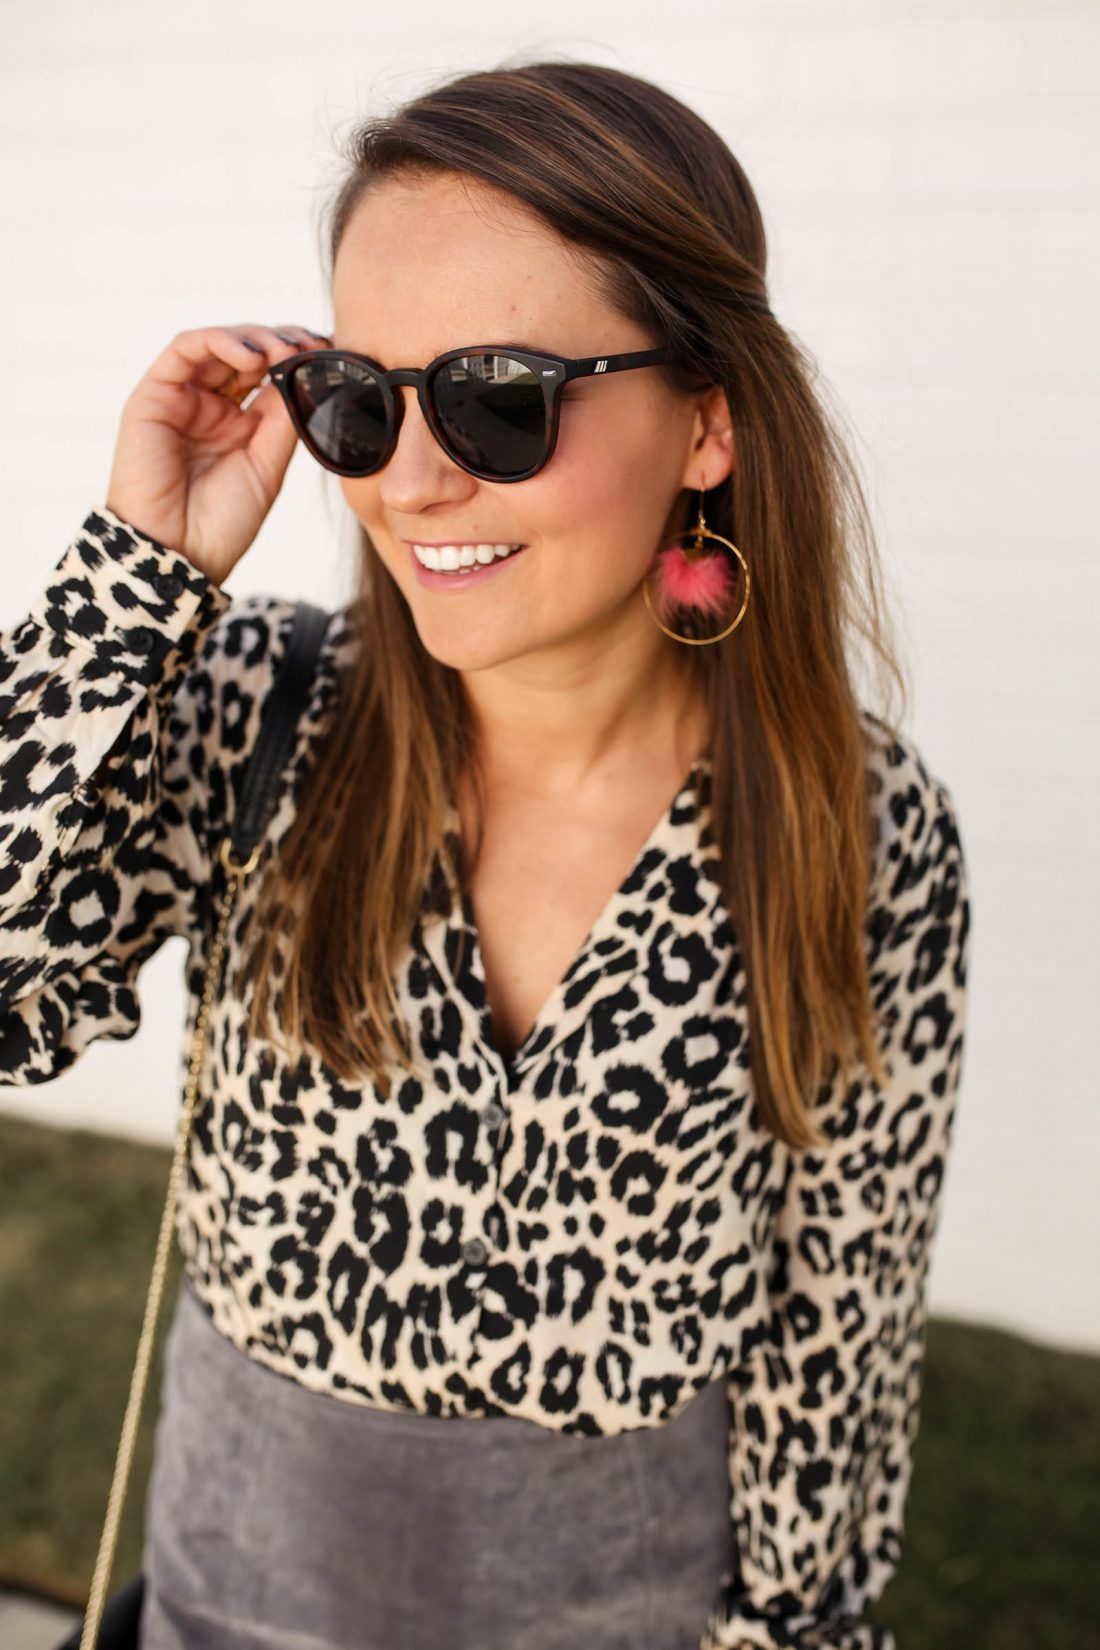 Leopard Print Top for Fall - Medicine & Manicures